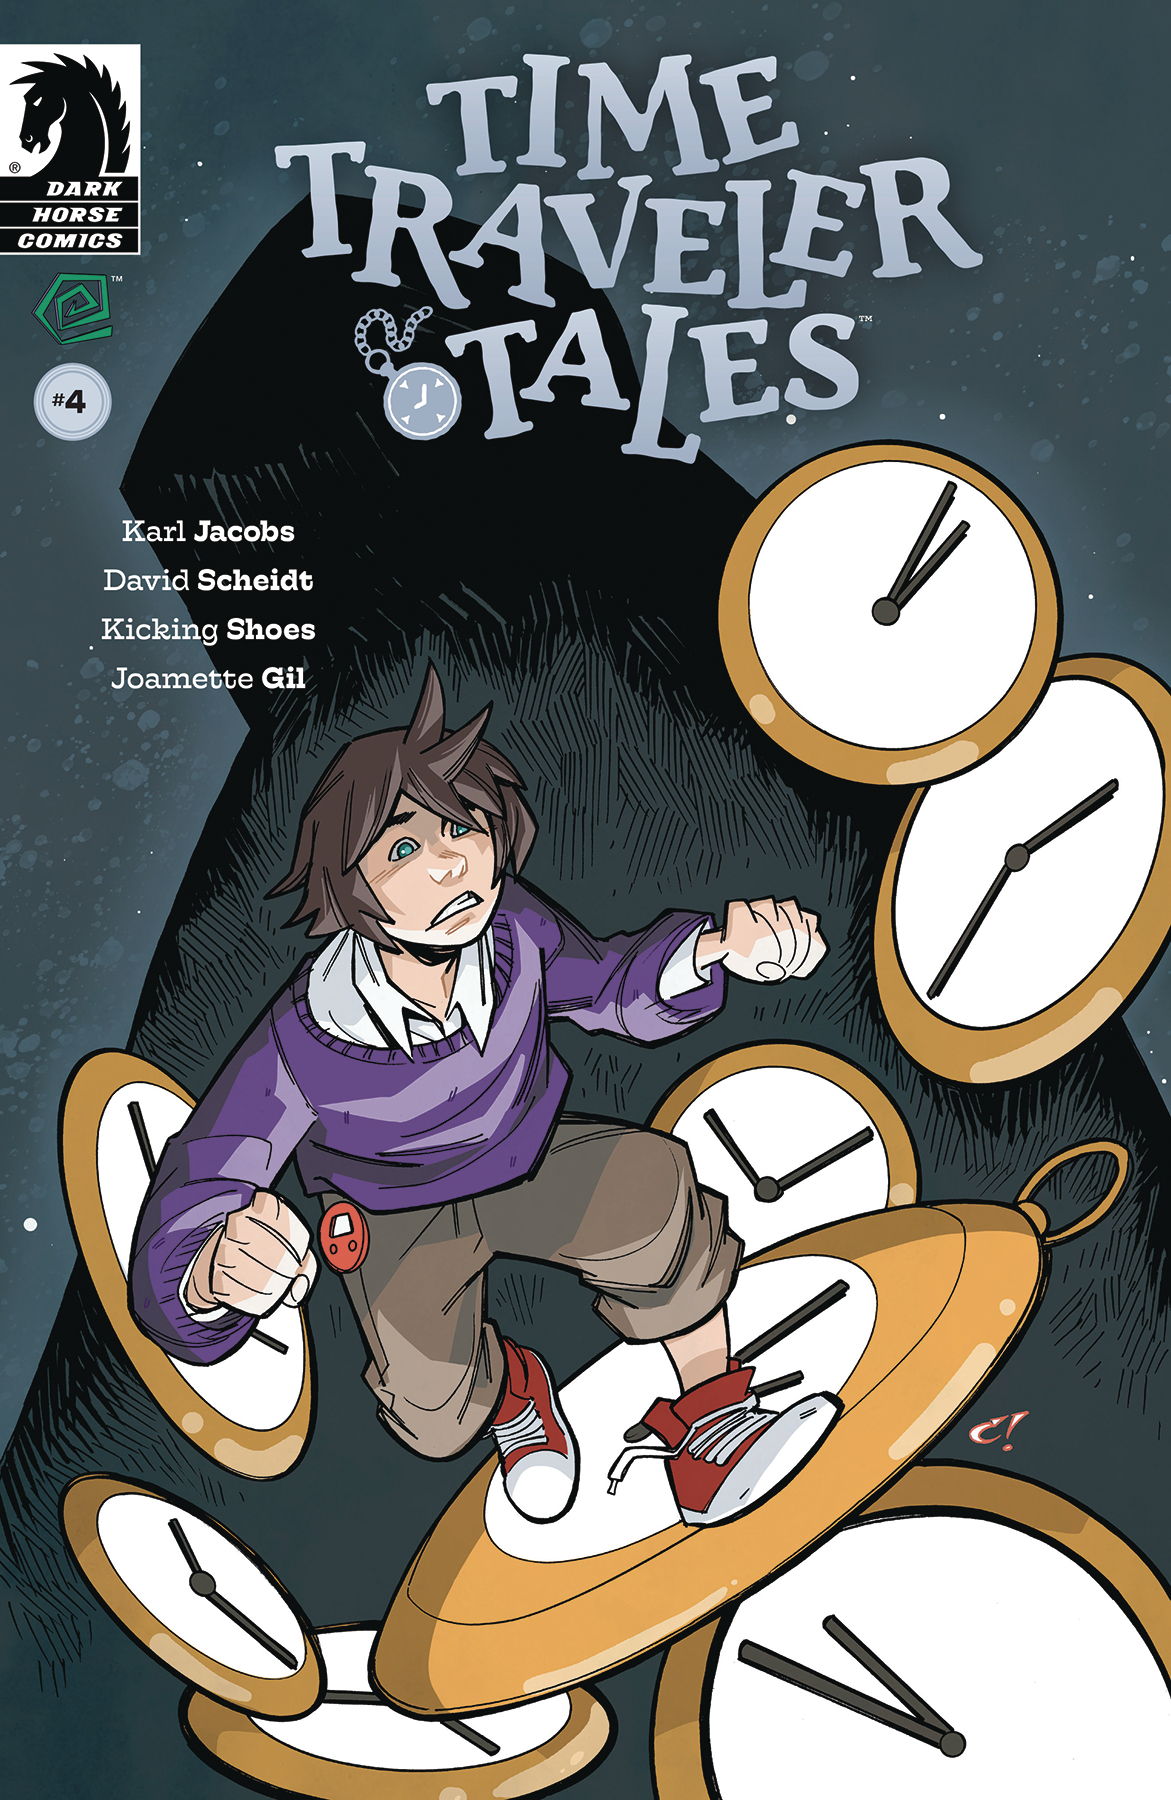 Time Traveler Tales #4 Cover A (Craig Rousseau)